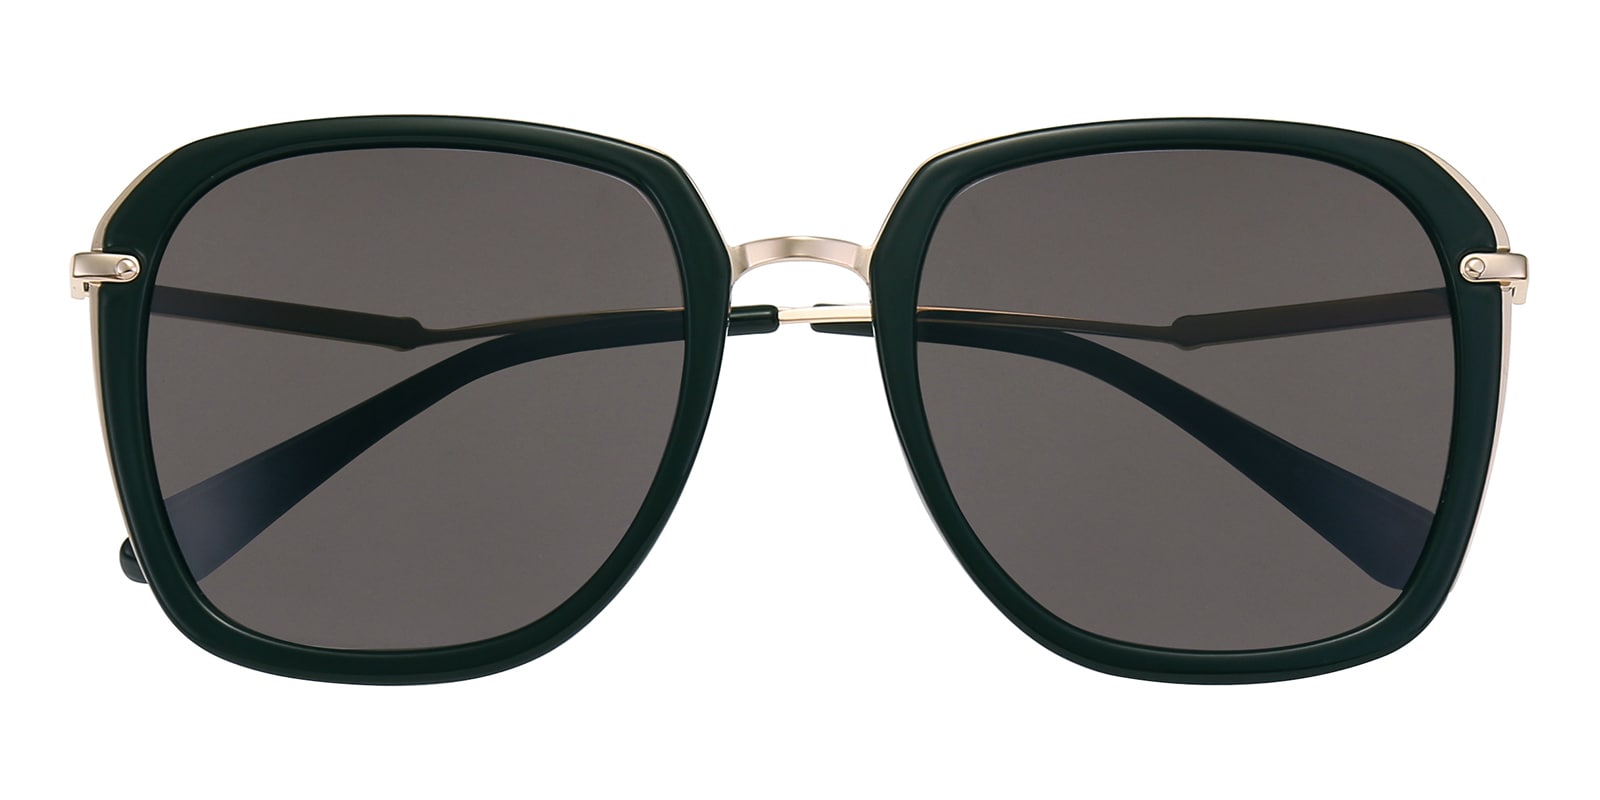 Oval Sunglasses, Full Frame Green Metal|TR90 - SUP1336